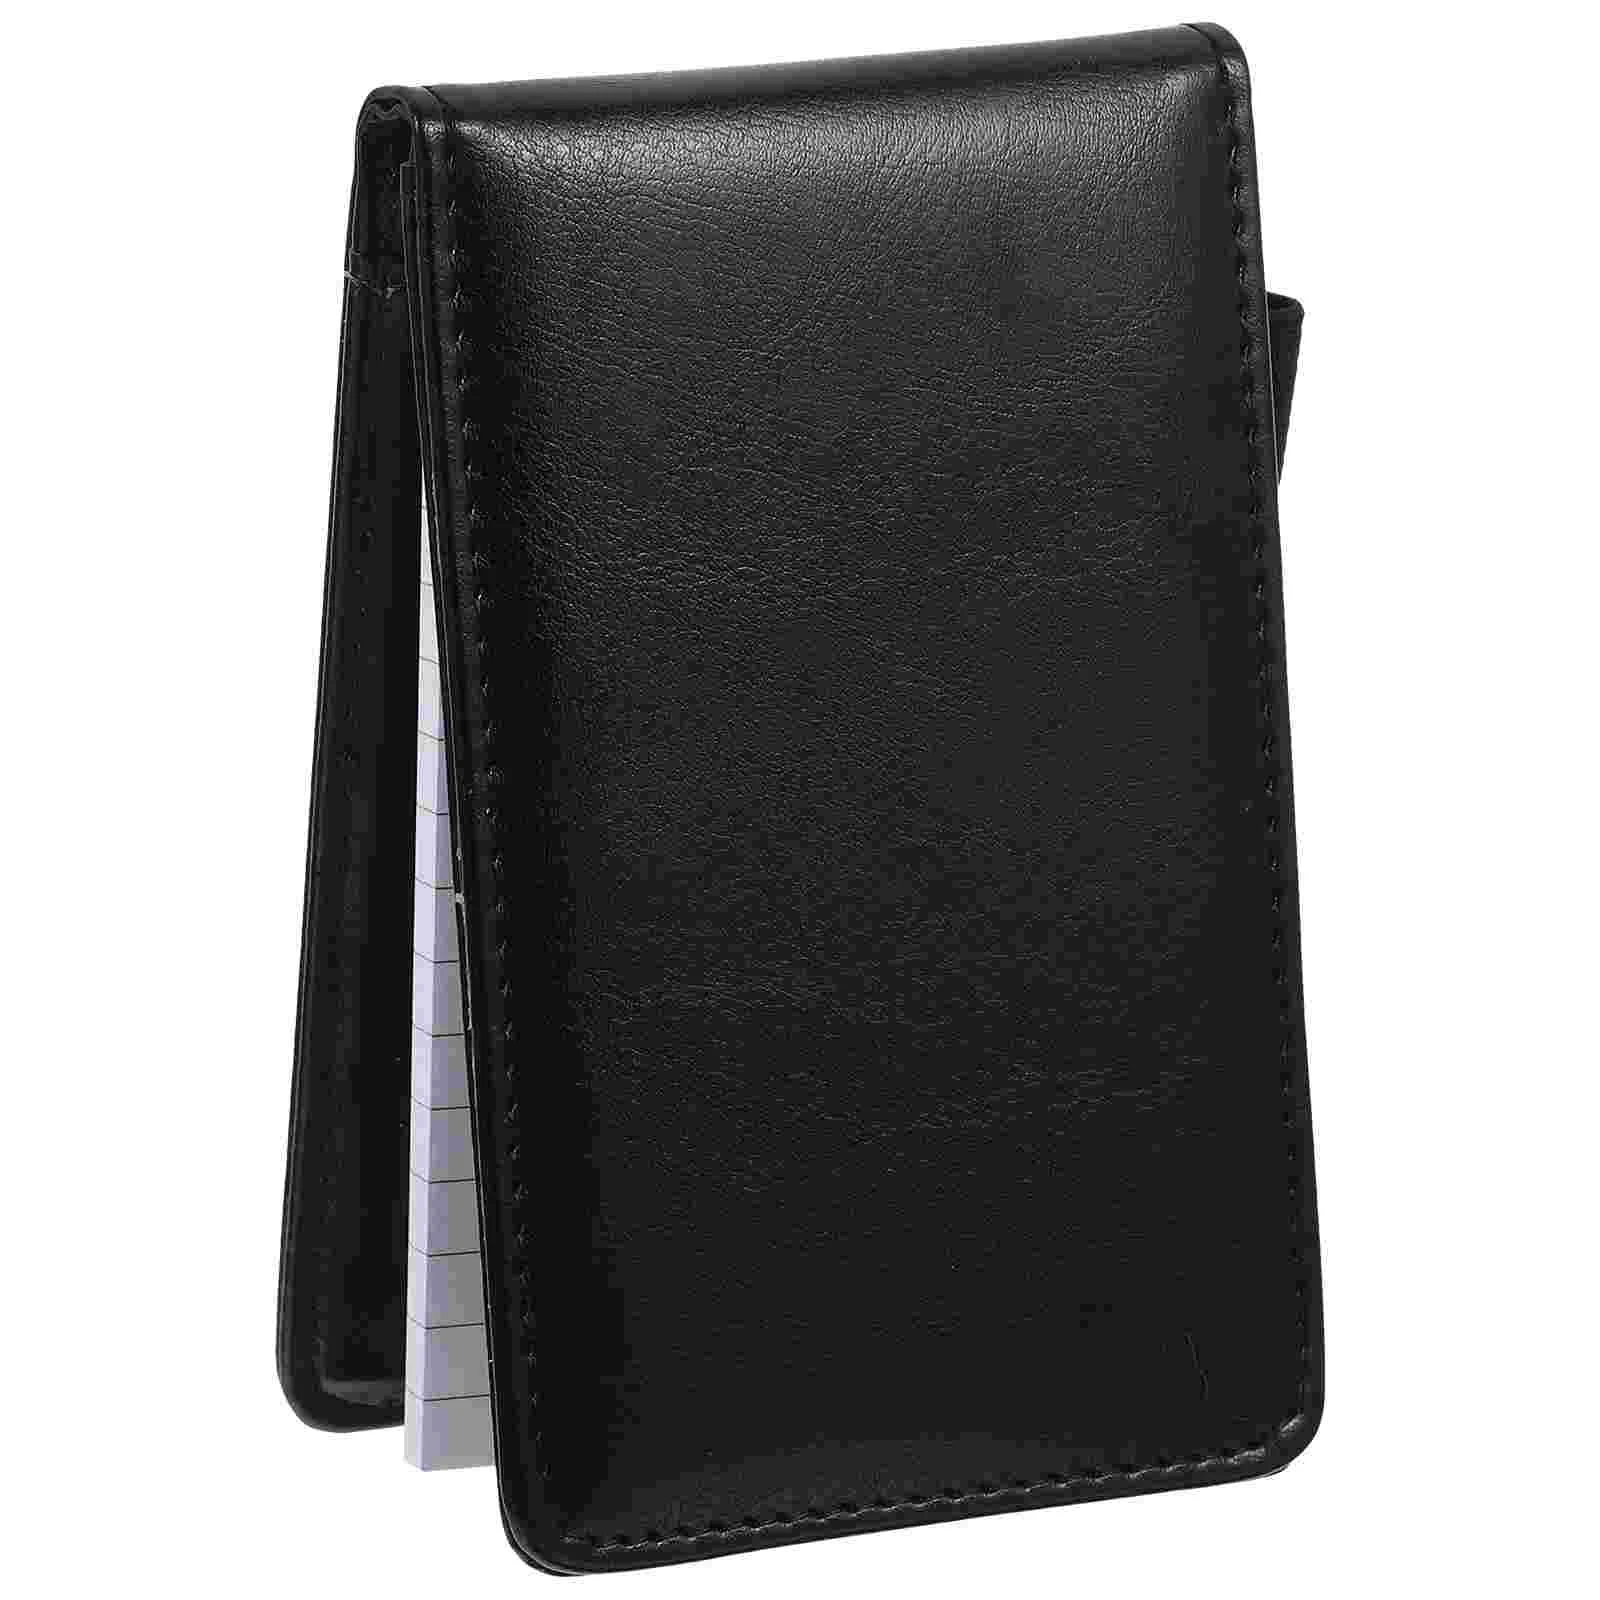 

Business Convenient Portable Flipped Business Book Office Supplies Portable Memo Pad Office Pocket Notepad for Work Memo Office